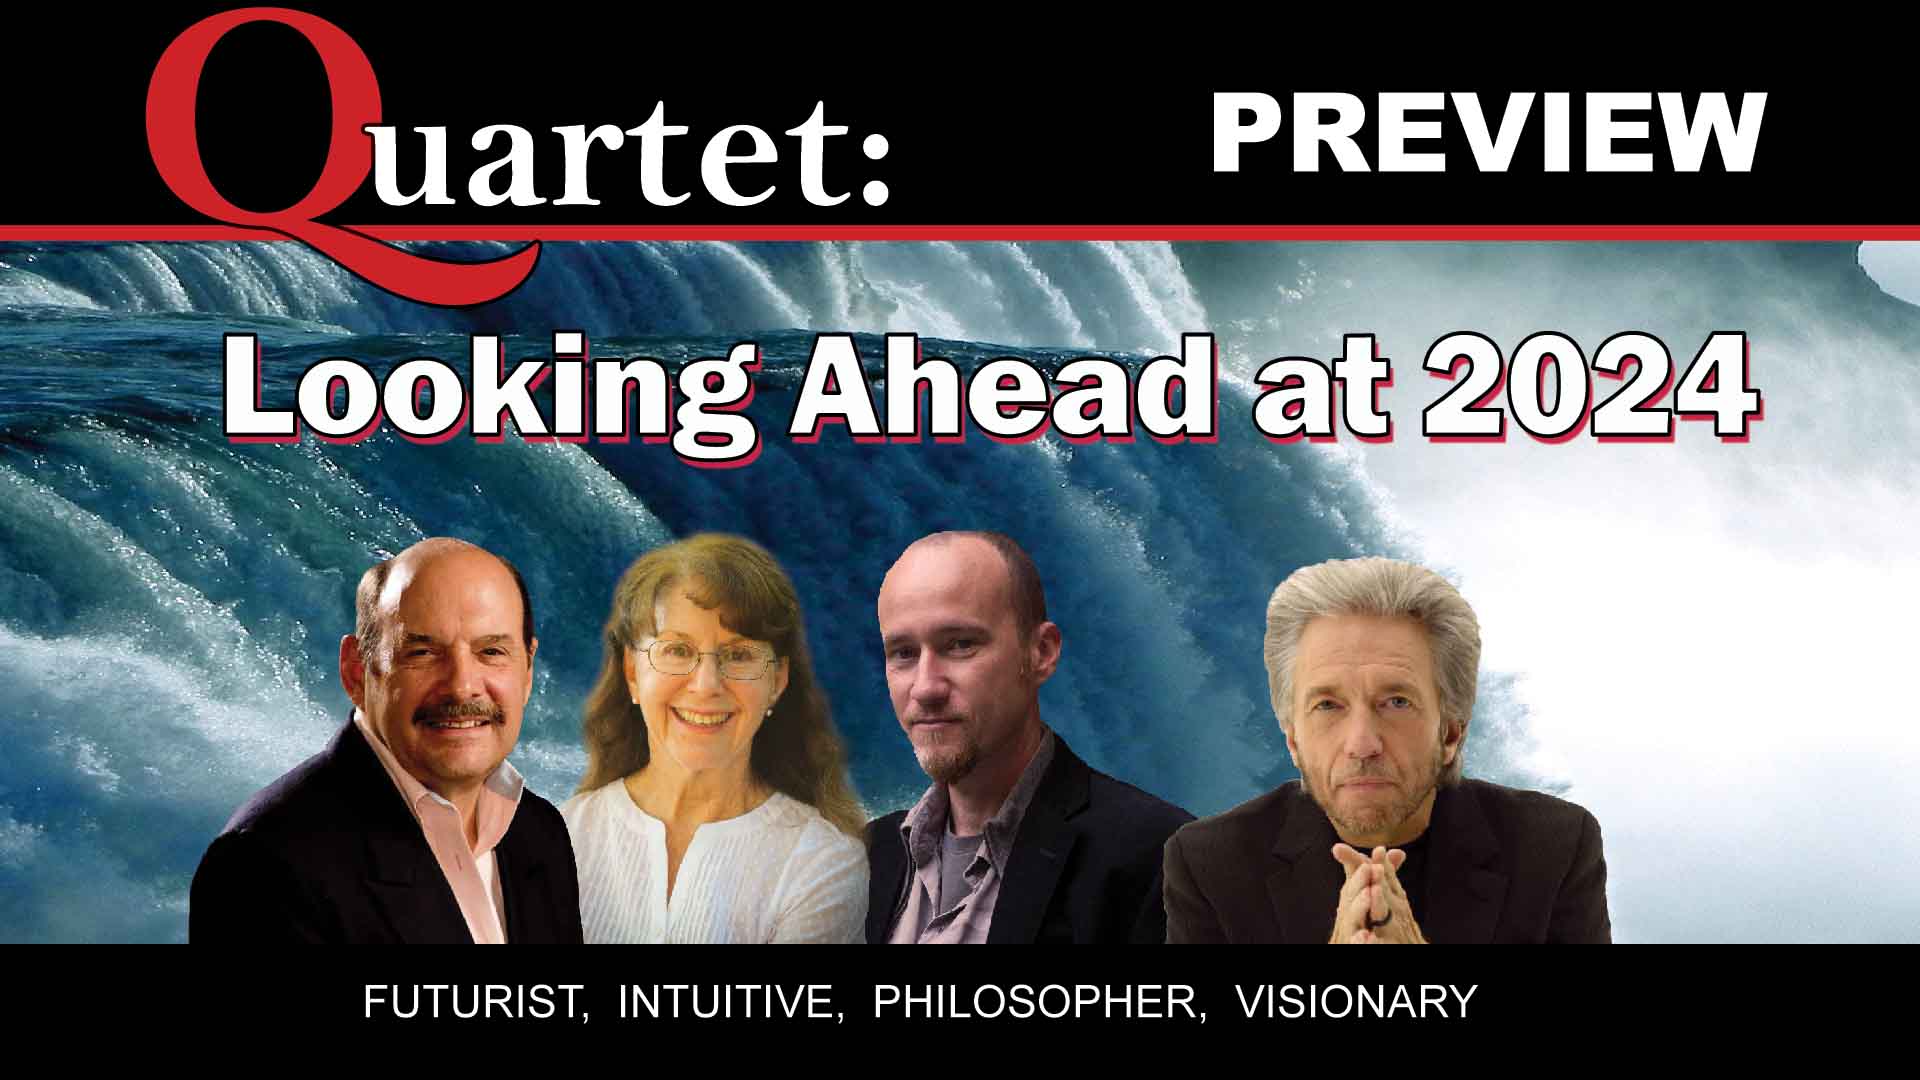 Quartet Preview - Looking Ahead at 2024